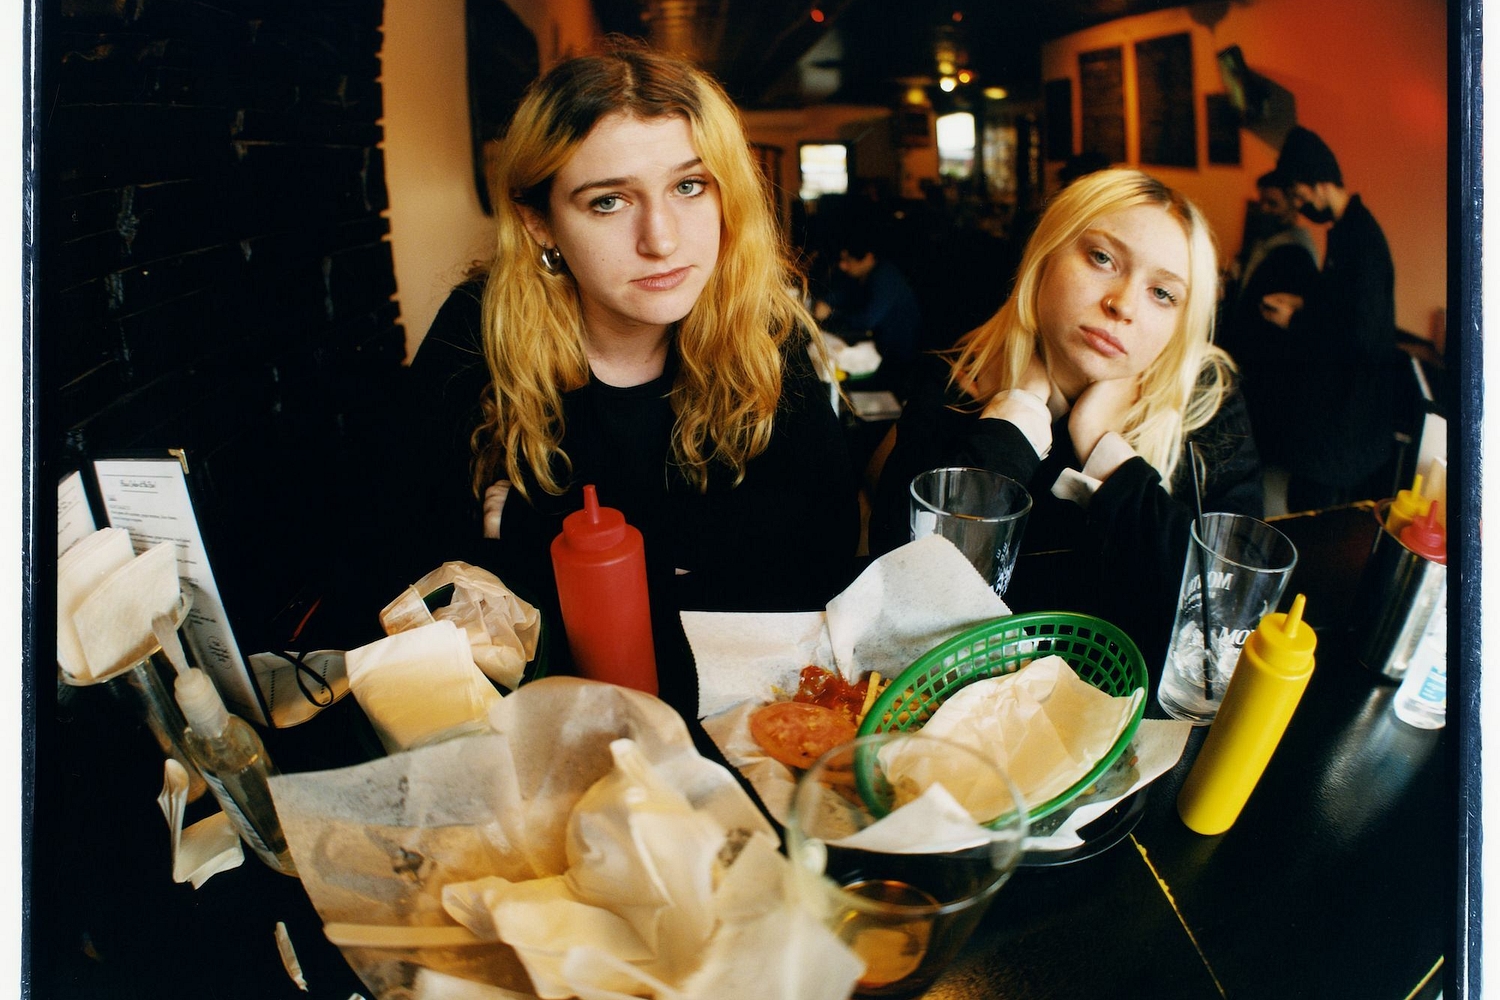 The Neu Bulletin (Momma, Deadletter, Emumclaw and more!)